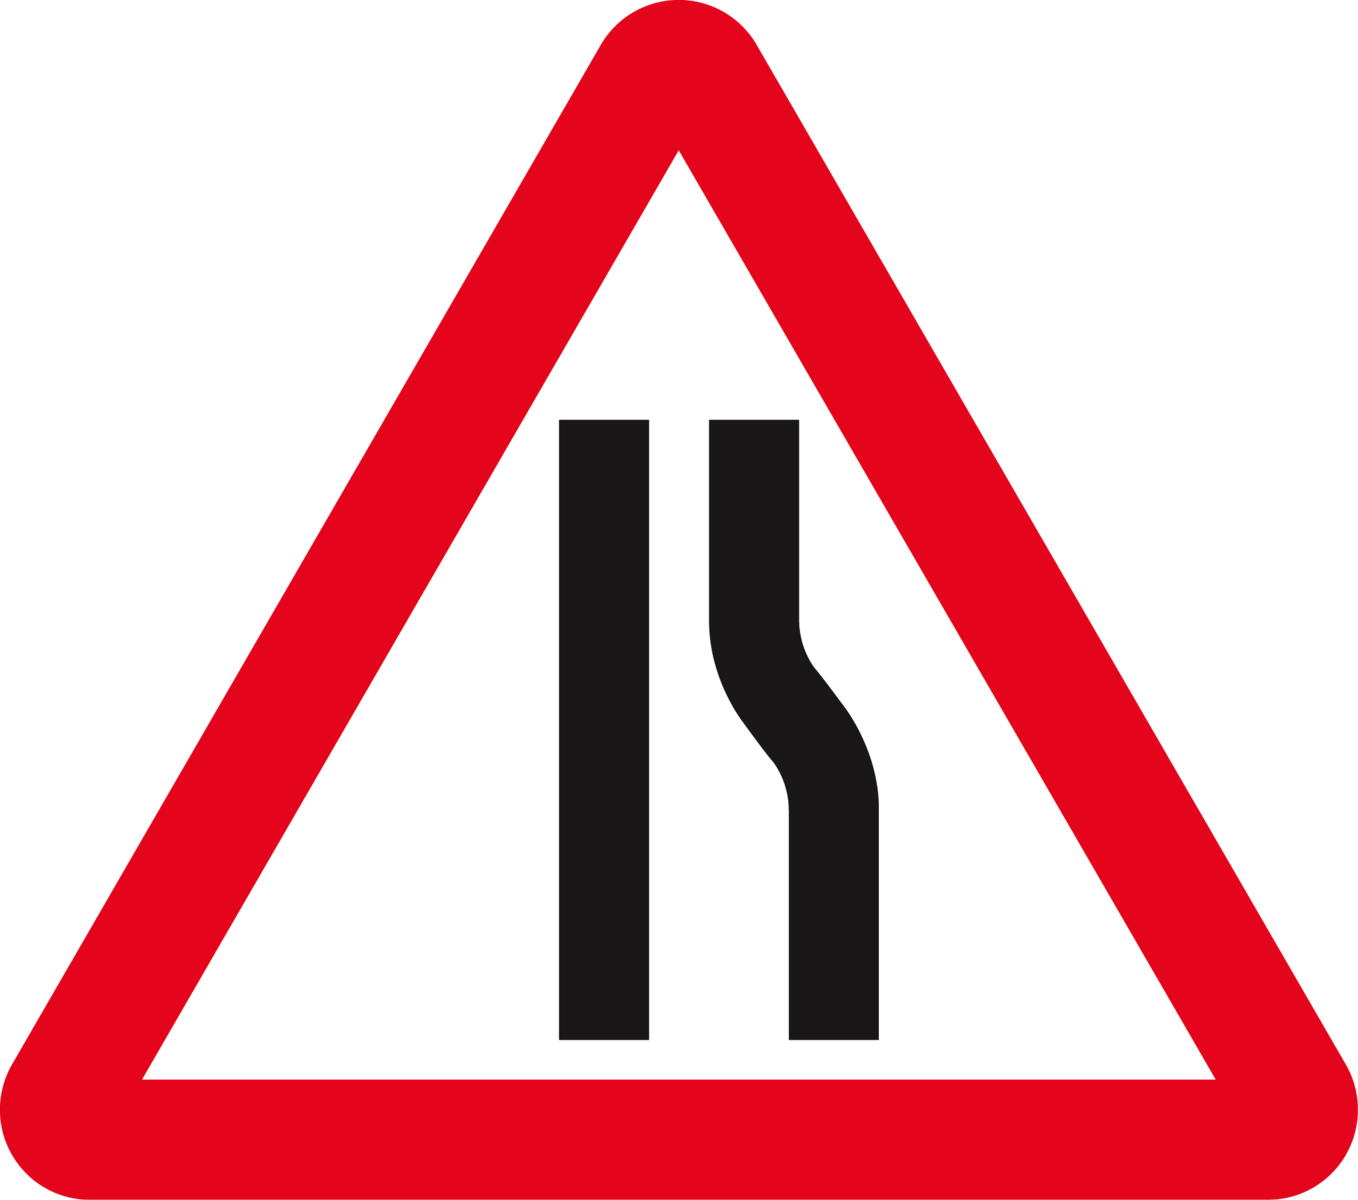 Road narrows on right (Left if symbol is reversed)